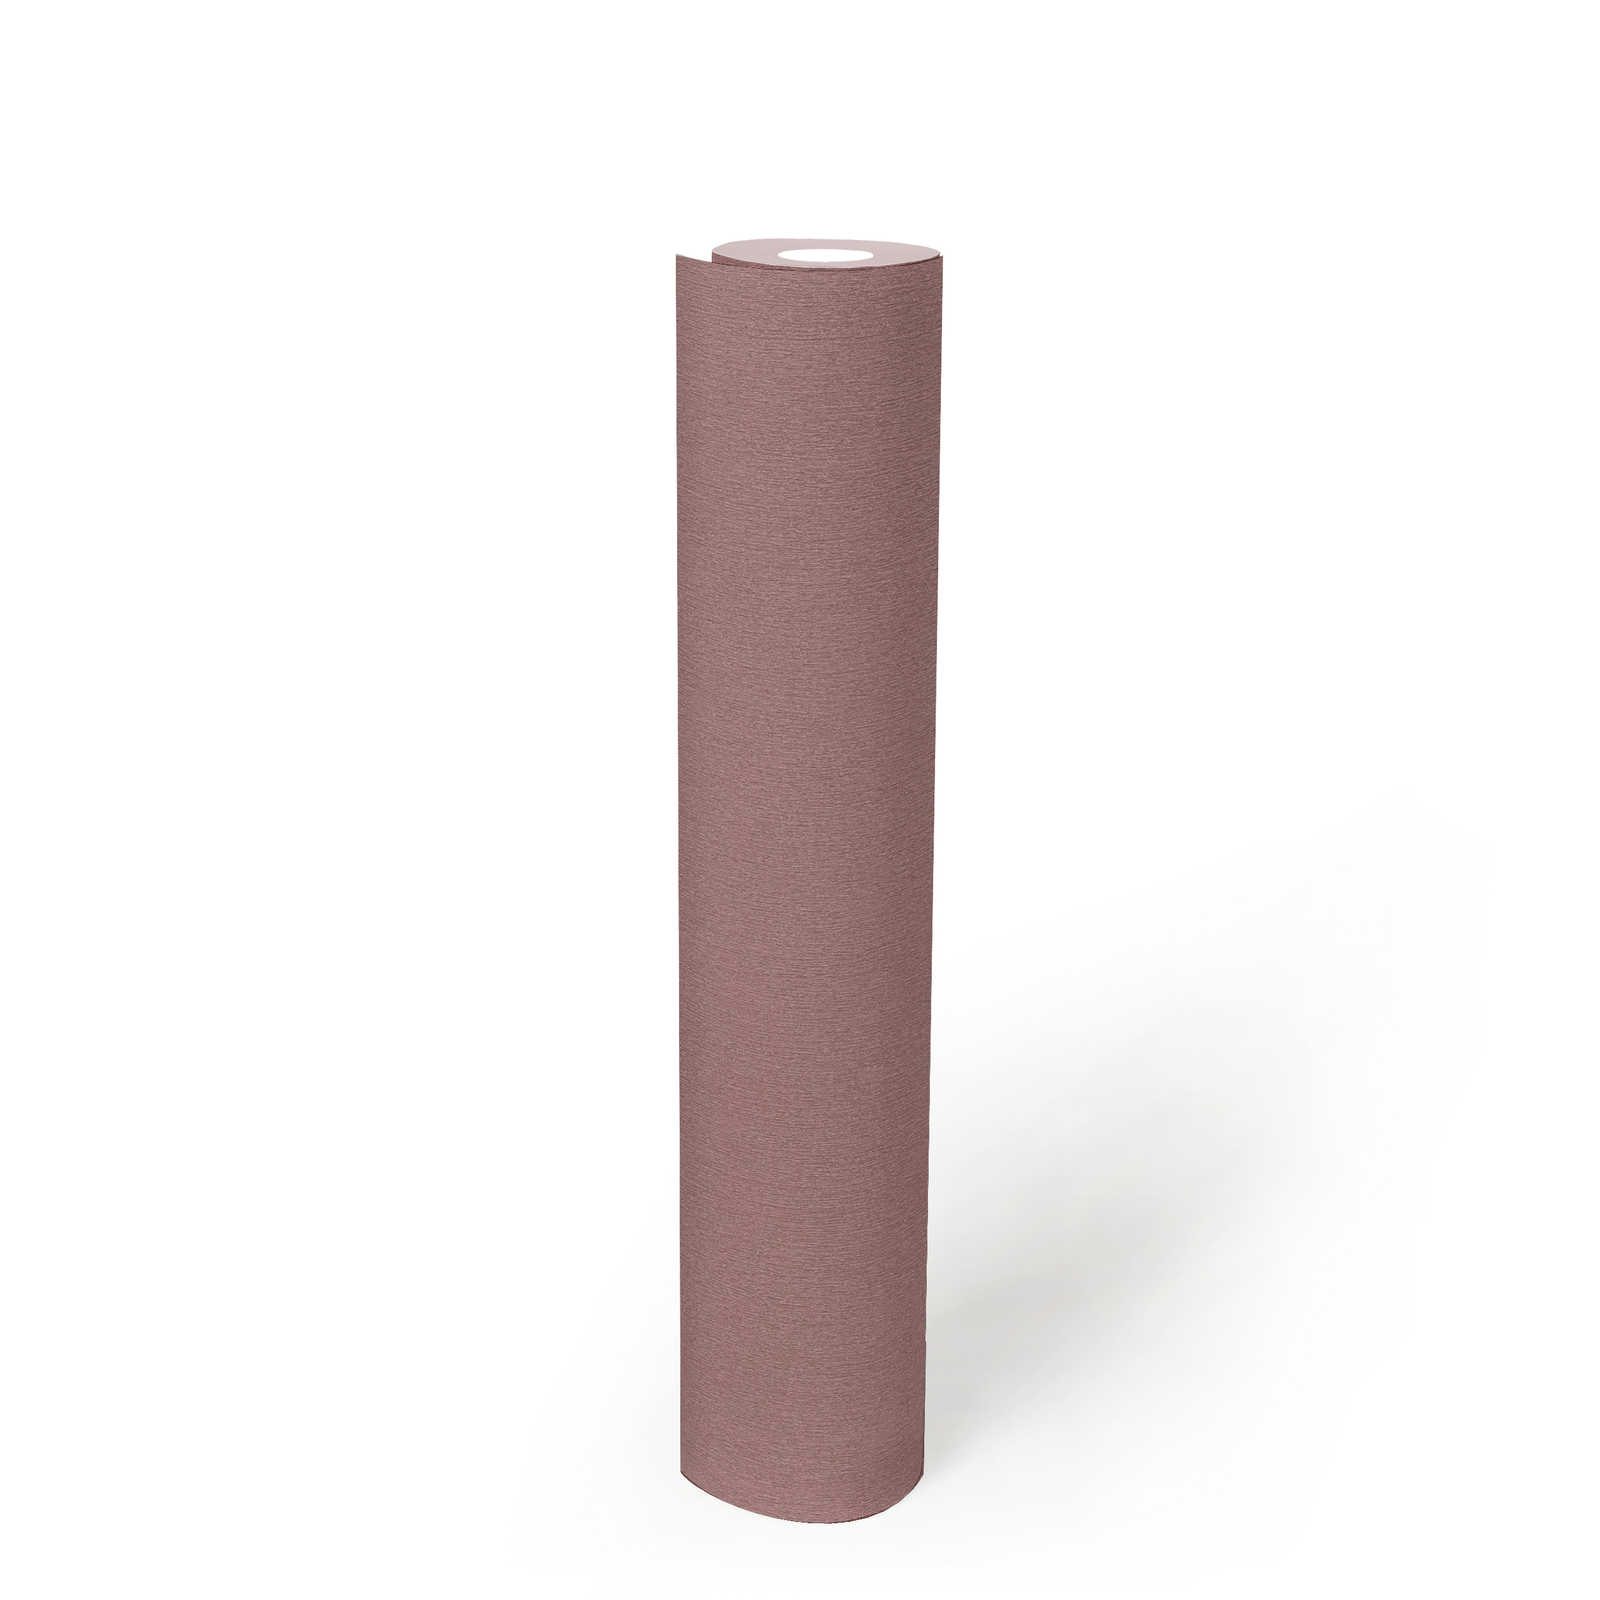             Plain wallpaper old pink with colour hatching
        